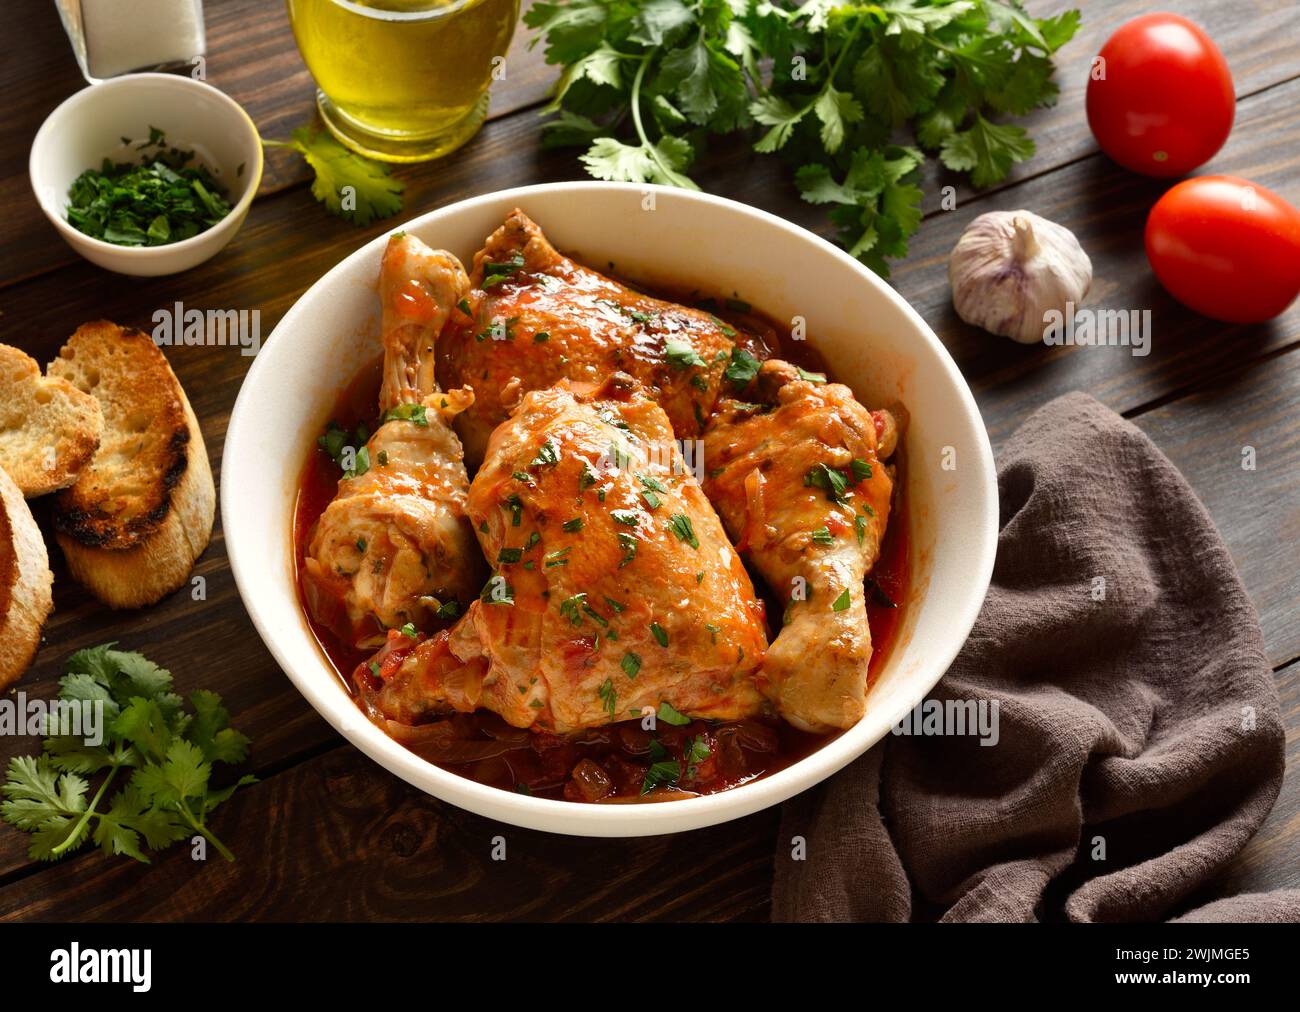 Georgian chicken stew with tomatoes and herbs (chakhokhbili) in bowl over wooden background. Baked chicken meat with tomato vegetable gravy. Healthy e Stock Photo